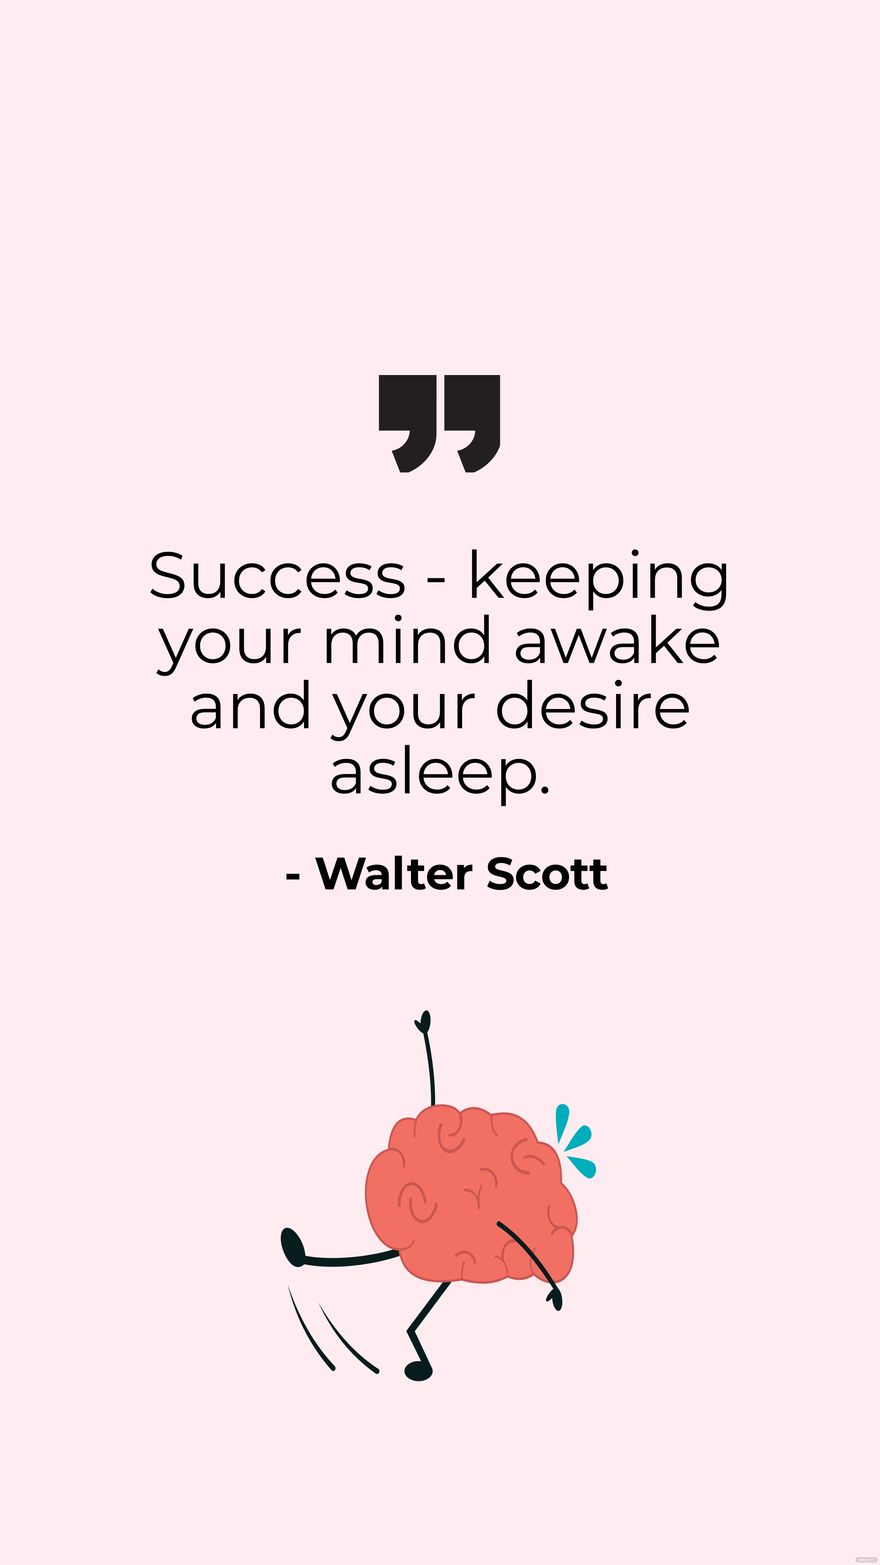 Walter Scott-Success - keeping your mind awake and your desire asleep. in JPG